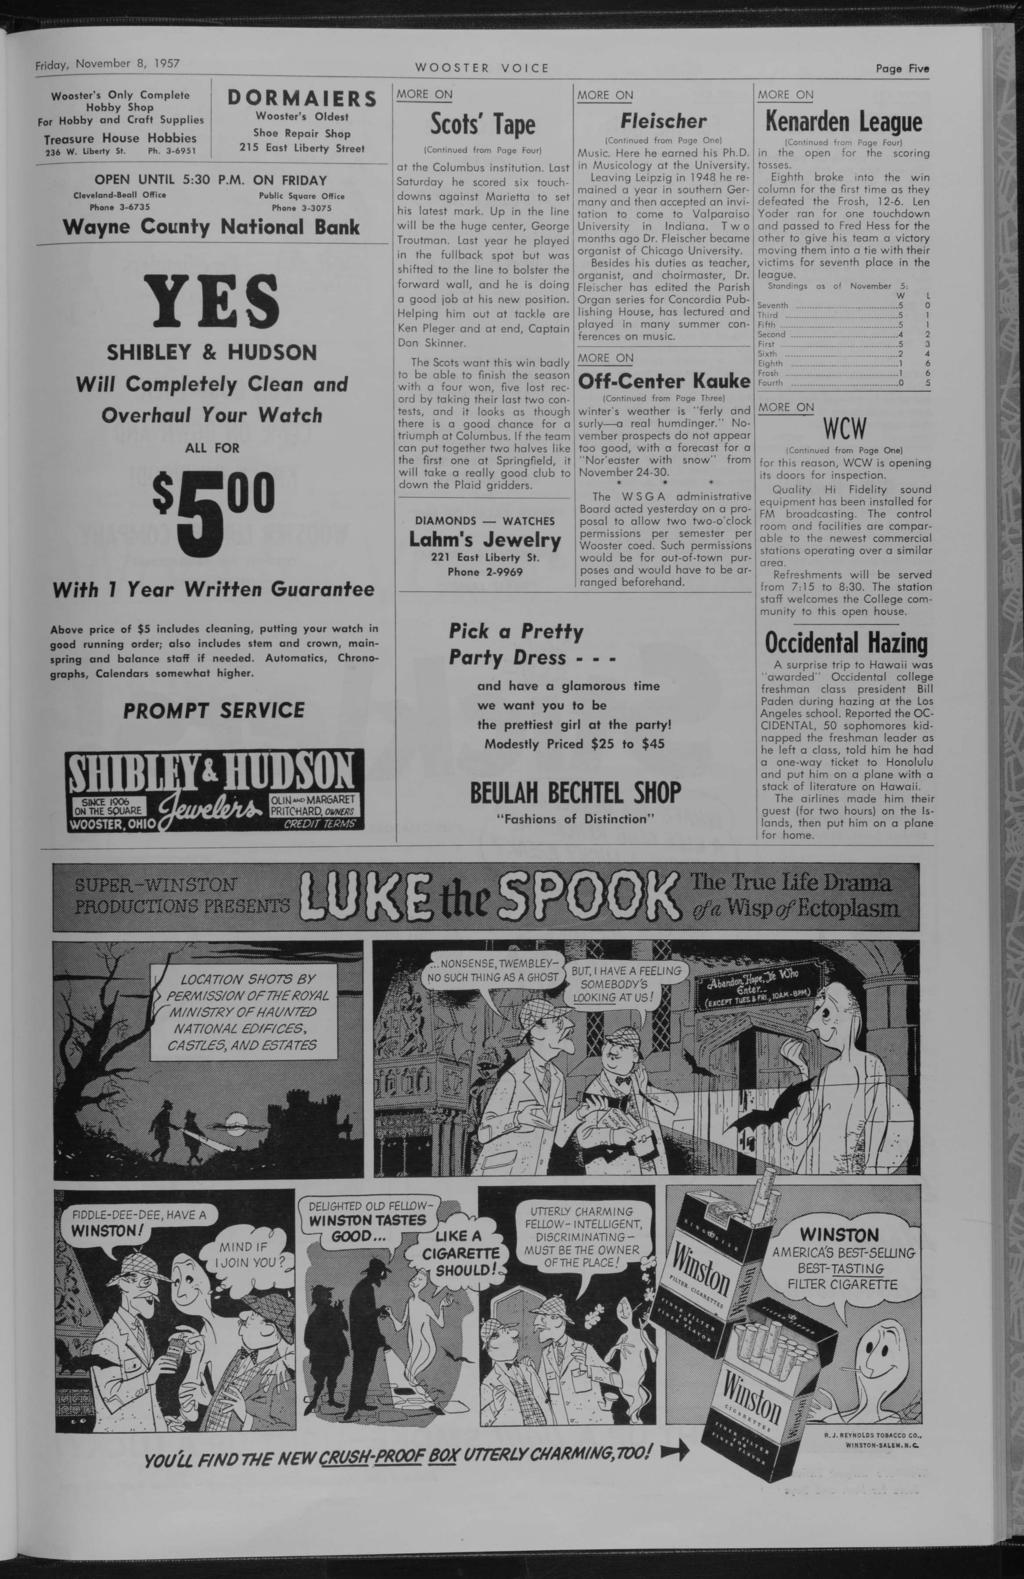 WW'.W-.'.'.'.1.1..'.1."."-.' Frday, November 8, 1957 Wooster's Only Complete Hobby Shop For Hobby and Craft Supples Treasure House Hobbes 236 W. Lberty St. 3-69- Ph.